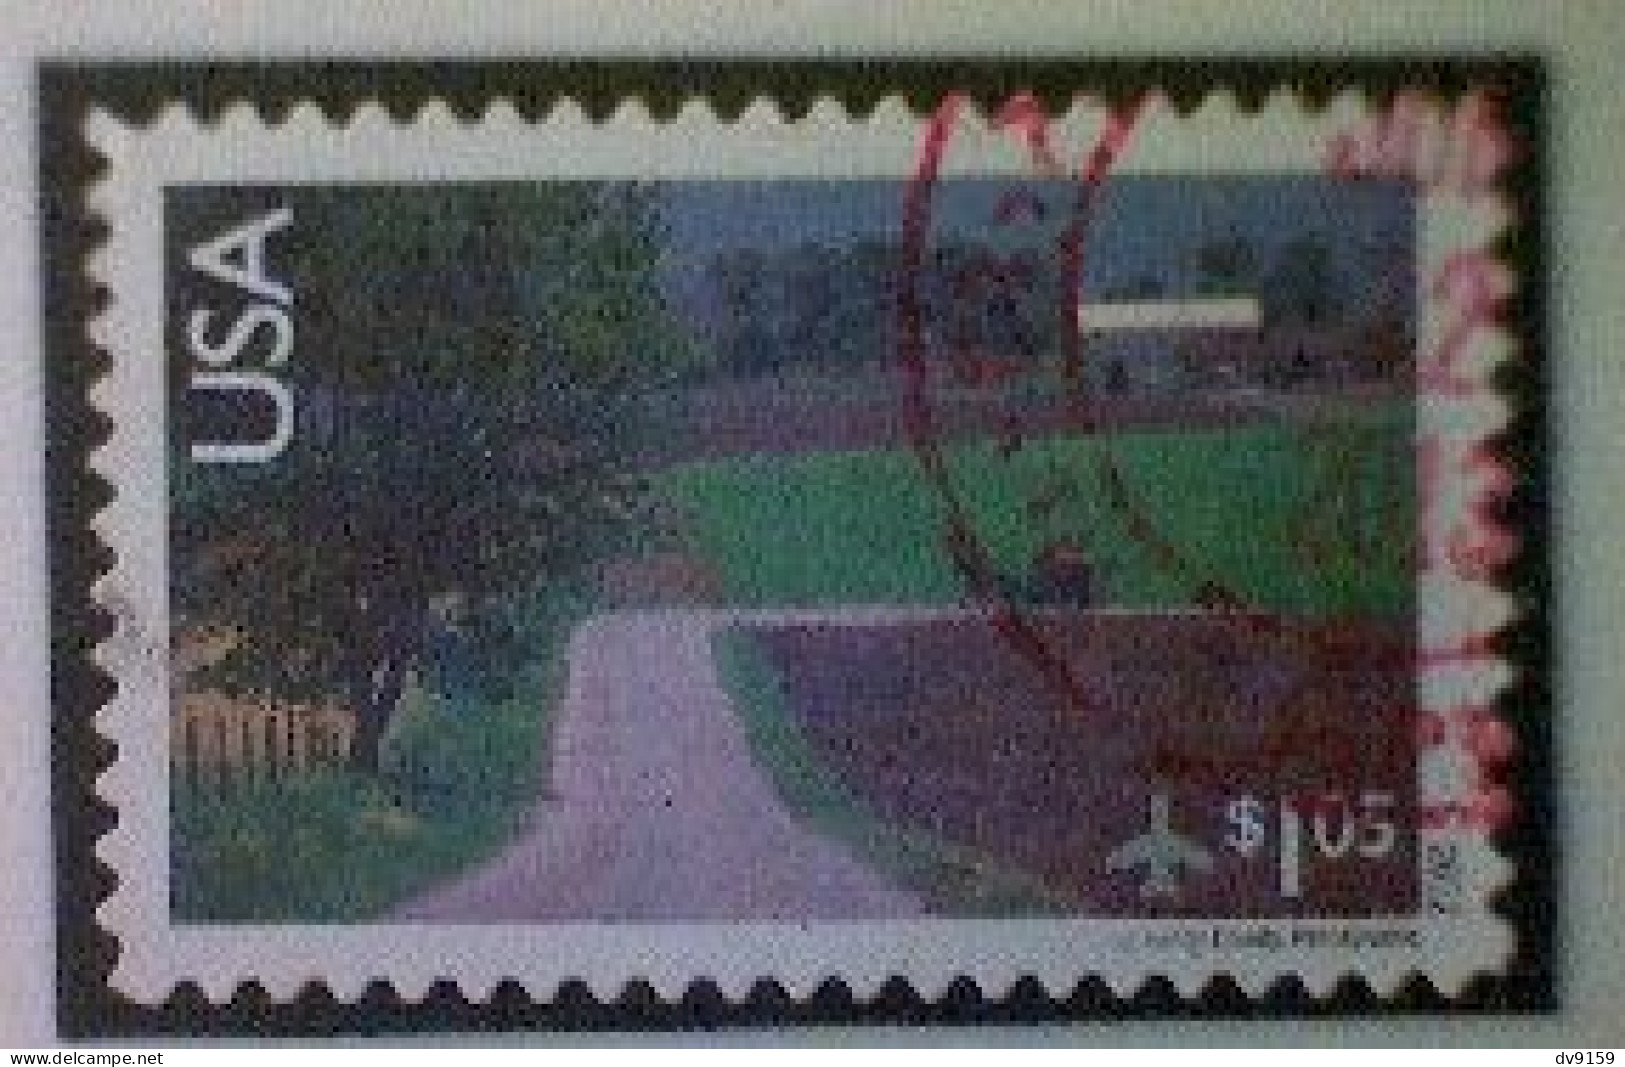 United States, Scott #C150, Used(o), 2012 Air Mail, Amish Horse And Buggy, $1.05, Multicolored - Used Stamps